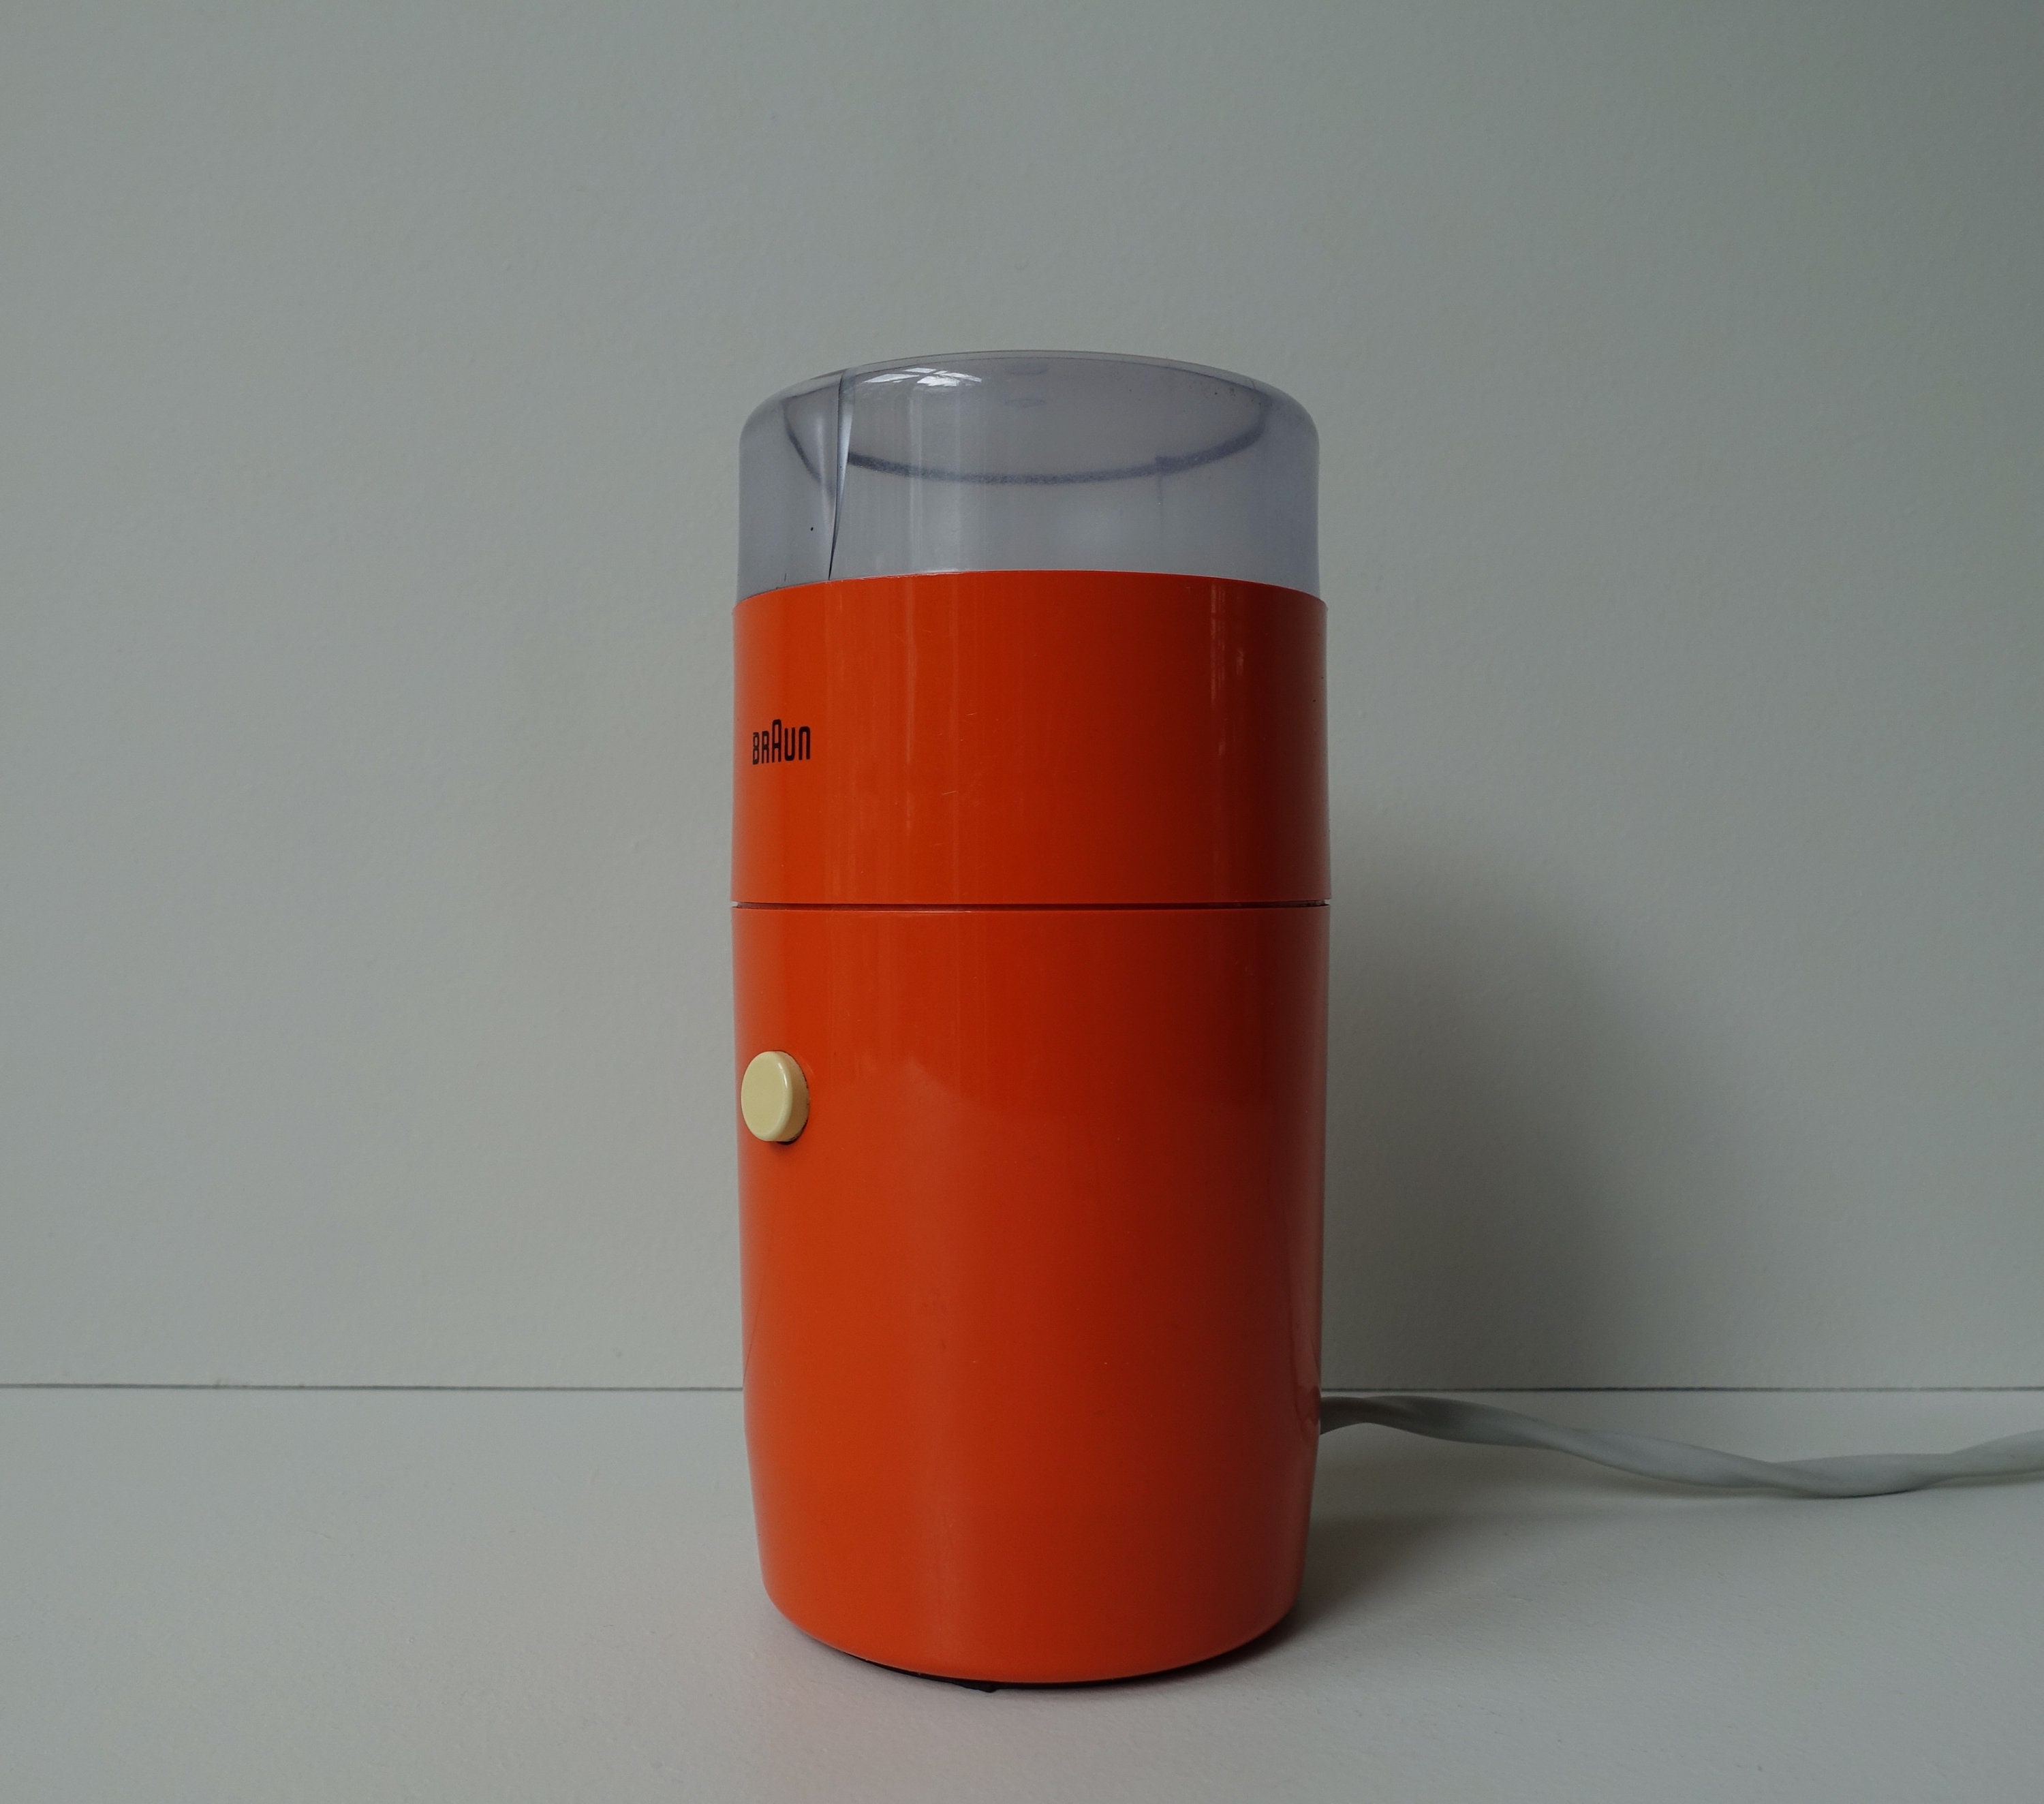 Experiment Lil Contract ORANGE Iconic Braun coffee grinder designed by Reinhold Weiss - Etsy België